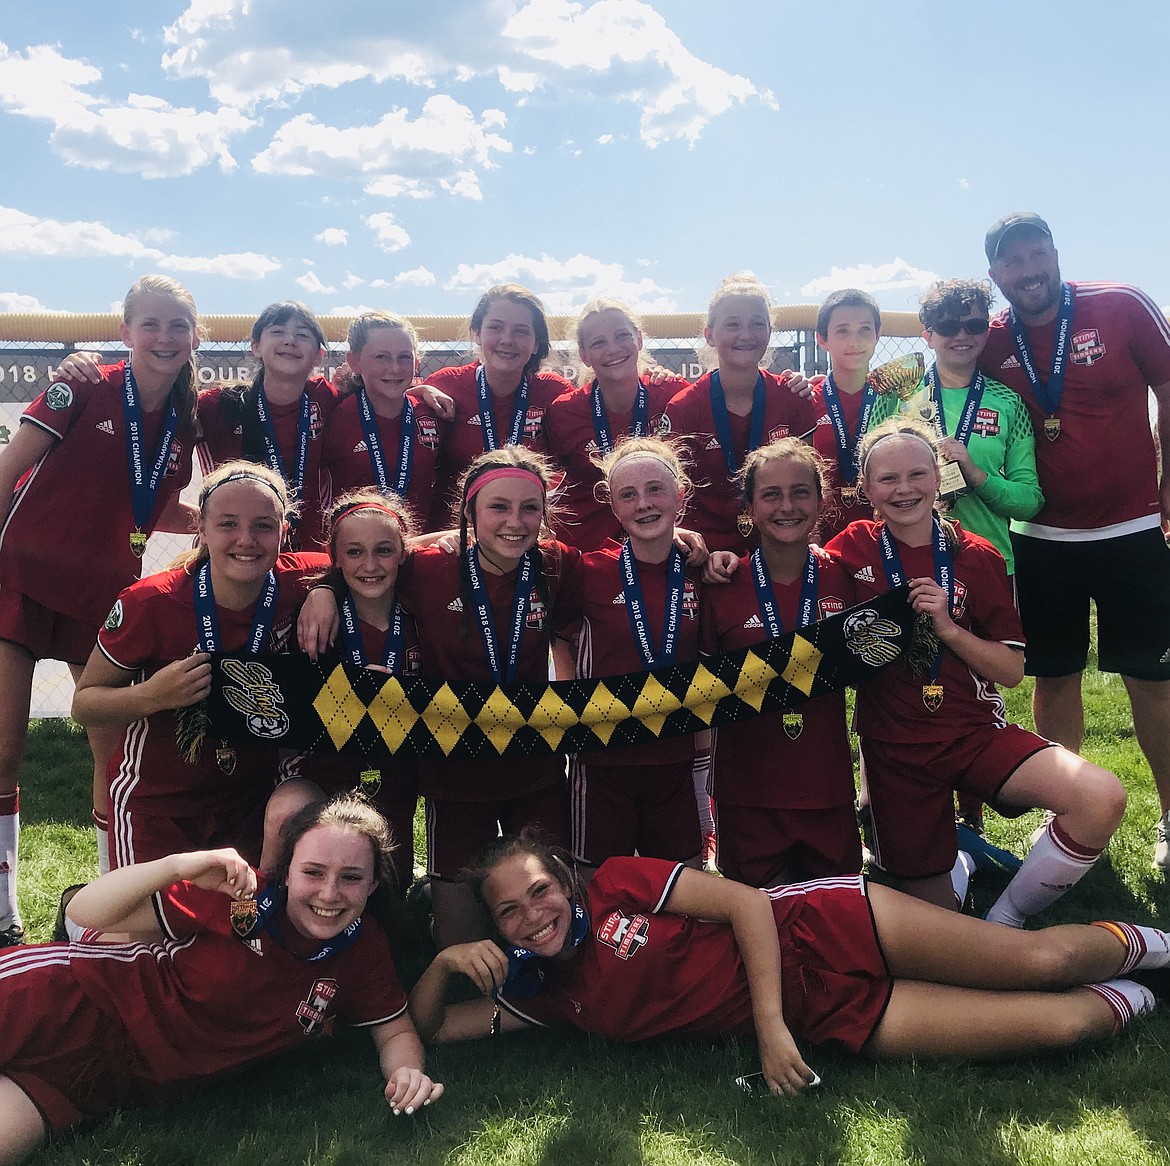 Courtesy photo
The Sting Timbers 05 Girls Red soccer team went undefeated and won the championship of their bracket in the Bill Eisenwinter Hot Shot Tournament last weekend. The Sting won its first game  8-0 against Missoula. Abella Voigt had a hat trick. Other goals were scored by Taleya Jones, Ella Morton, Gabrielle Henkle, Ember Morgan, and Jocelyn Dennis. Assists came from Elise Frazier, Mackenzie Goings, and Brynn Johnson. Game two the Sting beat Blitzz Gold 3-0. Abella Voigt scored once and Avery Waddington scored twice. Assists came from Mackenzie Goings and Mira Crawford. Game three STFC beat the Sandpoint Strikers 4-1. Goals were scored by Abella Voigt, Mackenzie Goings, Mira Crawford, and Ella Morton. Taleya Jones had 2 assists. The championship game was played against Hells Canyon and went into overtime with the STFC winning 3-2. Ella Morton and Avery Waddington scored during the game, with assists from Jocelyn Dennis and Ella Morton. Elise Frazier scored the winning goal in overtime. Keeper Mekare East-Peters had two shutouts and only had 3 goals scored on her the whole weekend. In the front row from left are Abella Voigt and Taleya Jones; second row from left, Jocelyn Dennis, Berkley Owens, Elise Frazier, Quinn Kennedy, Gabrielle Henkle and Aubree McElvany; and back row from left, Avery Waddington, Mira Crawford, Brynn Johnson, Rylee White, Mackenzie Goings, Ella Morton, Ember Morgan, Mekare East-Peters and coach Nick Funkhouser.